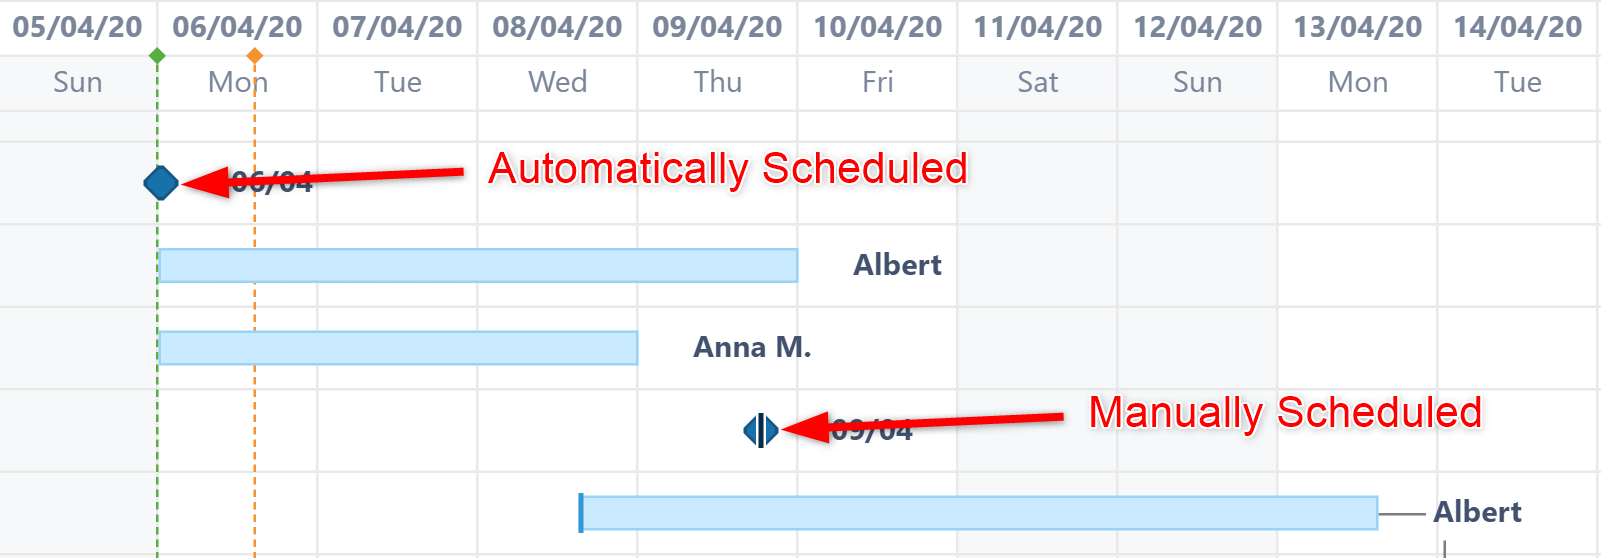 Manually scheduled milestones have a black line